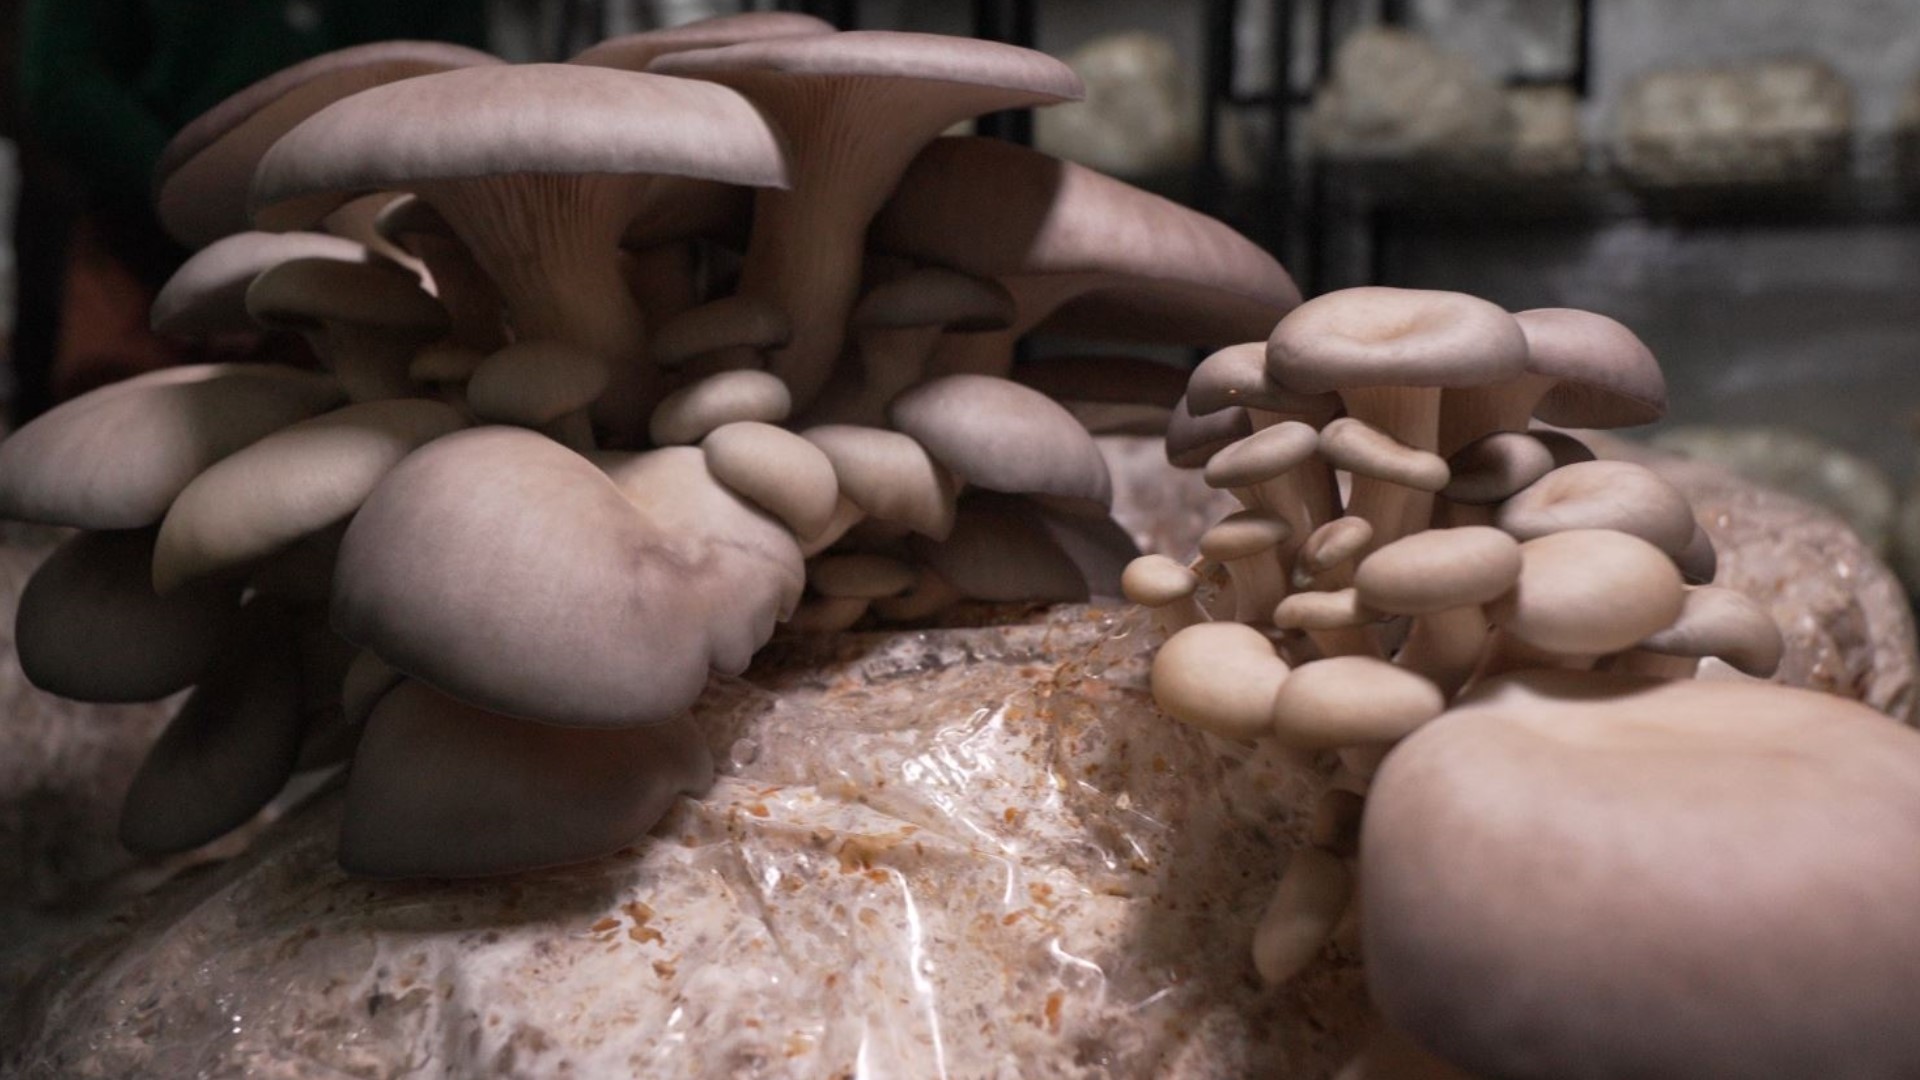 Black Forest Mushrooms was founded by Nathanael Engen to help make fresh gourmet mushrooms more widely available. #k5evening